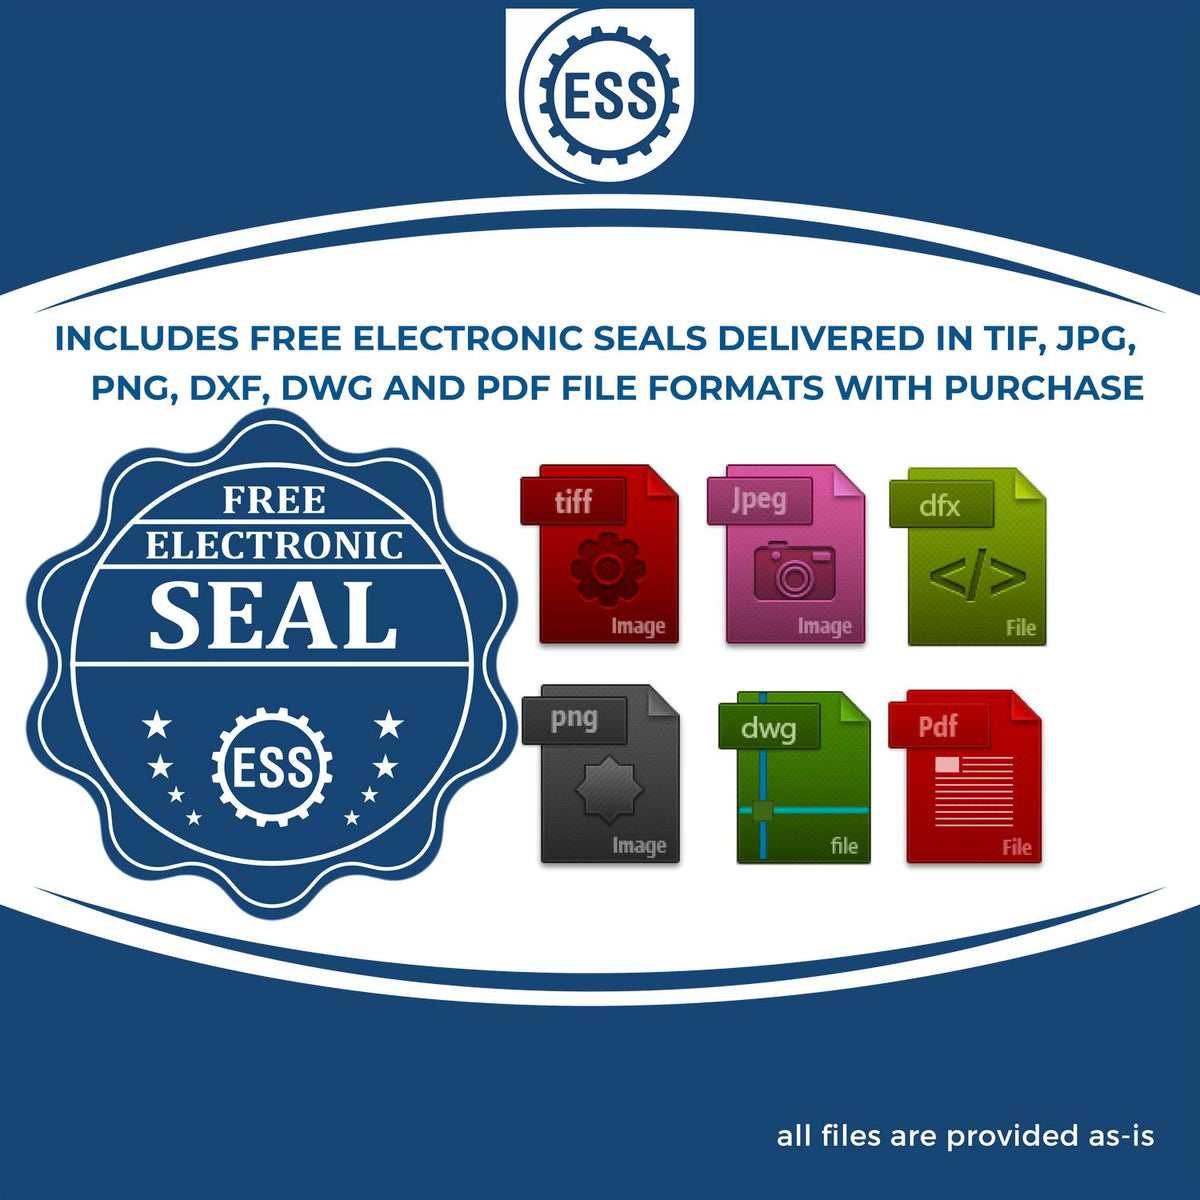 An infographic for the free electronic seal for the Hybrid Florida Architect Seal illustrating the different file type icons such as DXF, DWG, TIF, JPG and PNG.